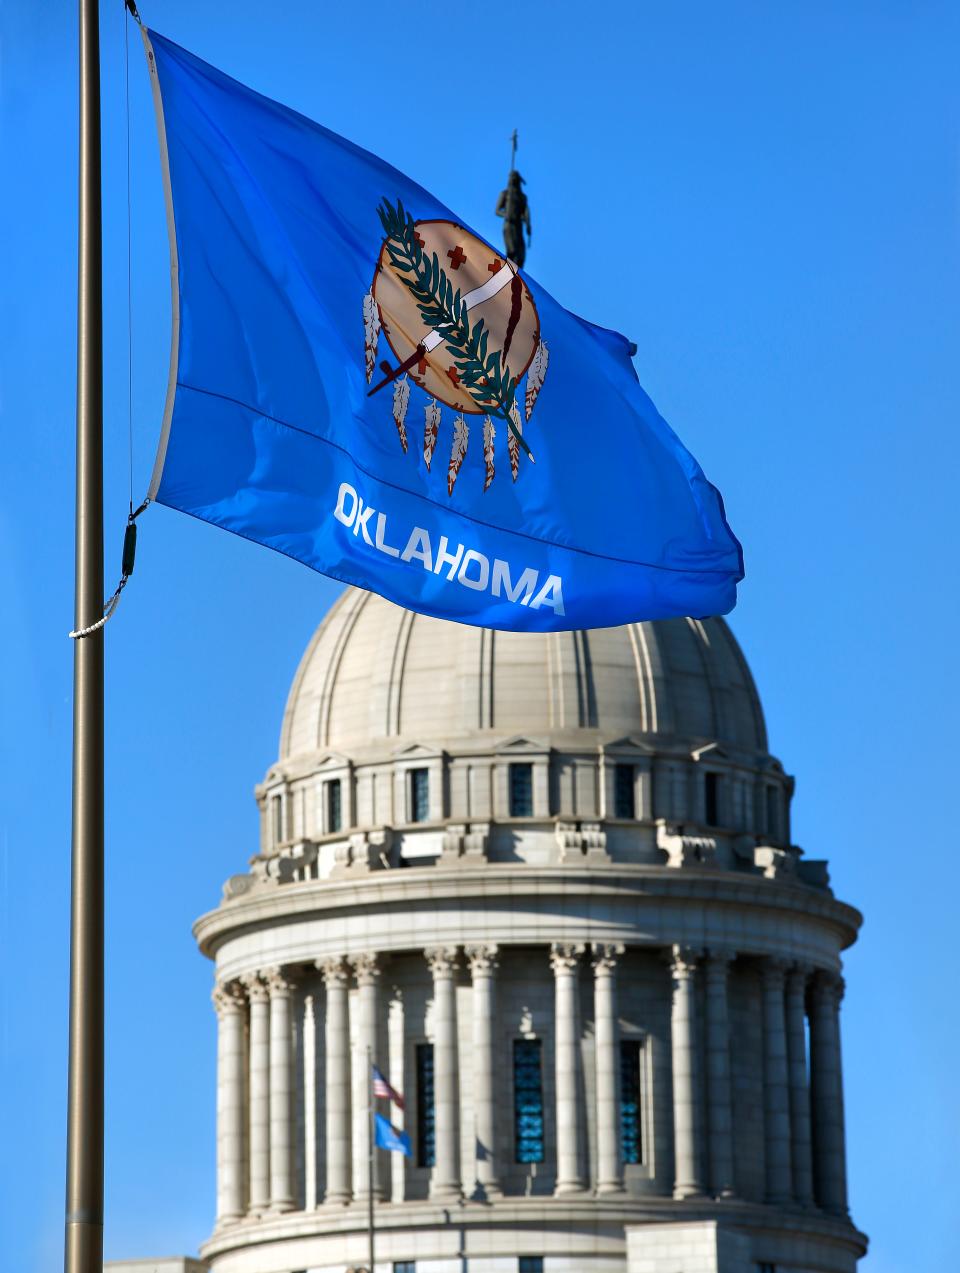 Oklahoma's state flag is seen waving in front of the Oklahoma Capitol in Oklahoma City.